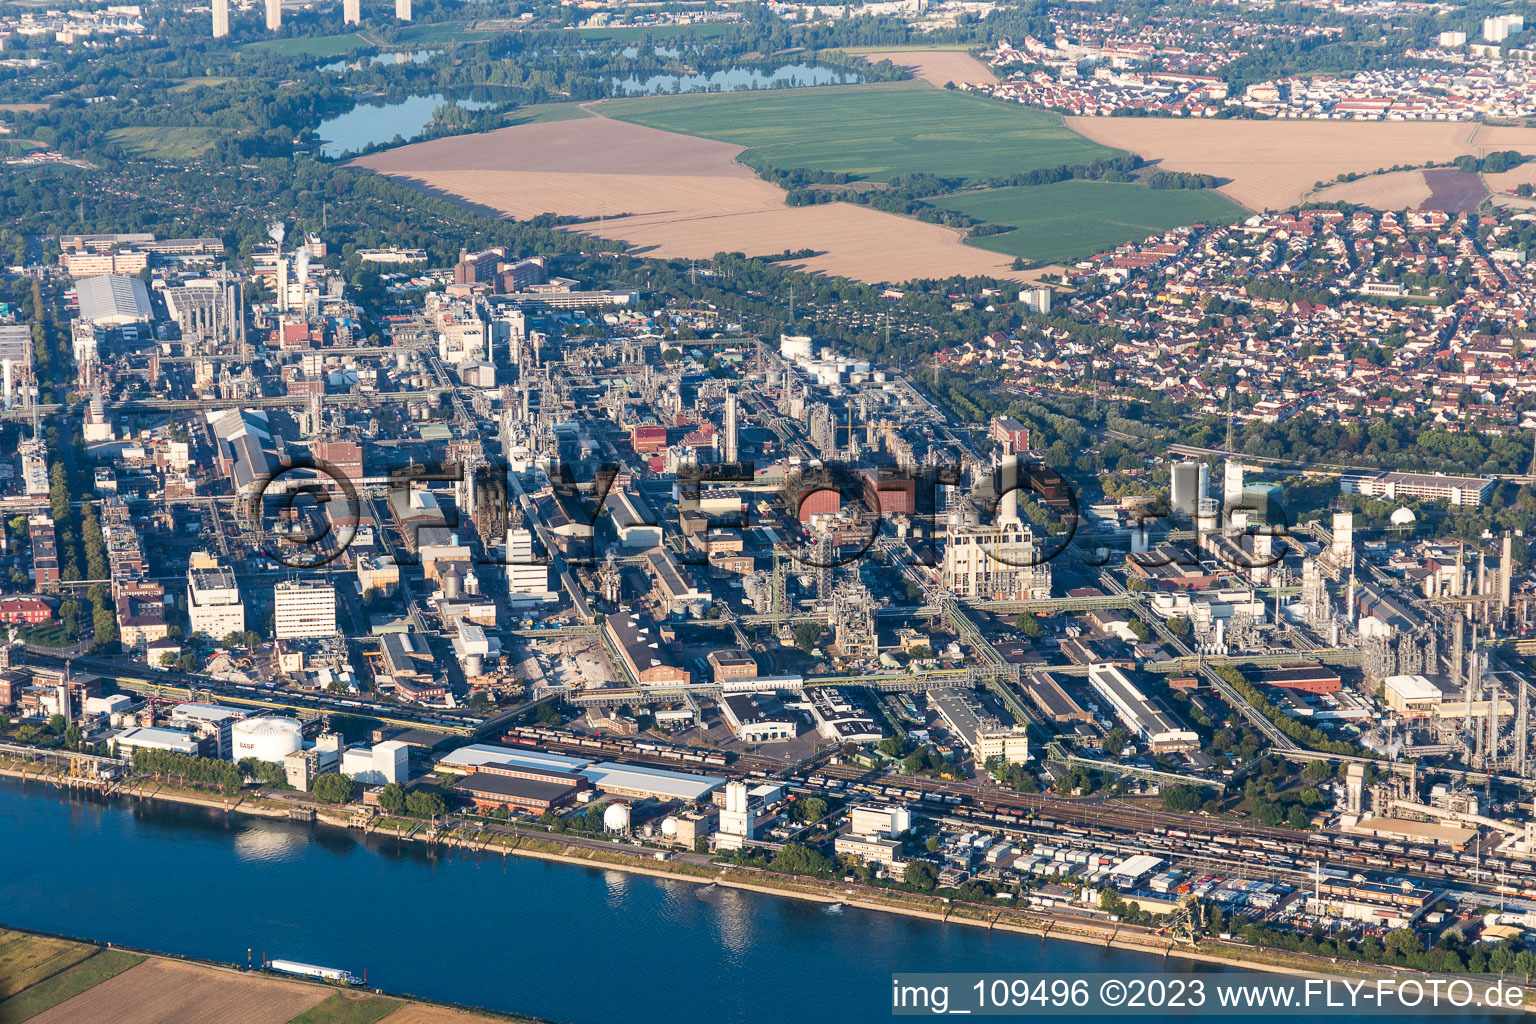 District BASF in Ludwigshafen am Rhein in the state Rhineland-Palatinate, Germany out of the air